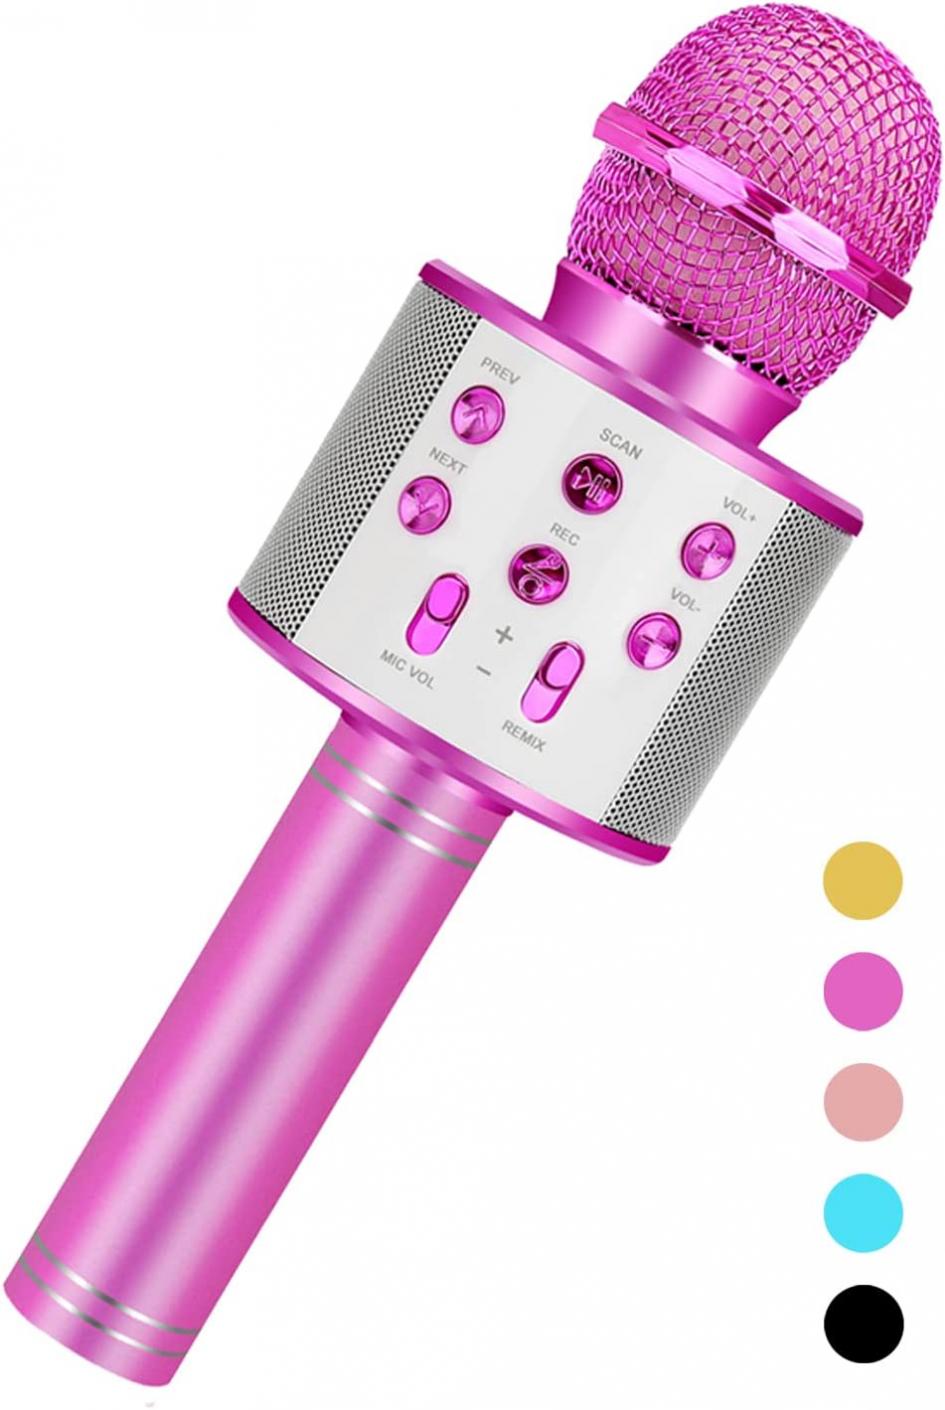 Niskite Kids Toys for 3-14 Year Old Girls Gifts,Karaoke Microphone Machine for Kids Toddler Toys Age 4-12, Christmas Birthday Valentine Gifts for 5 6 7 8 9 10 Year Old Teens Girl